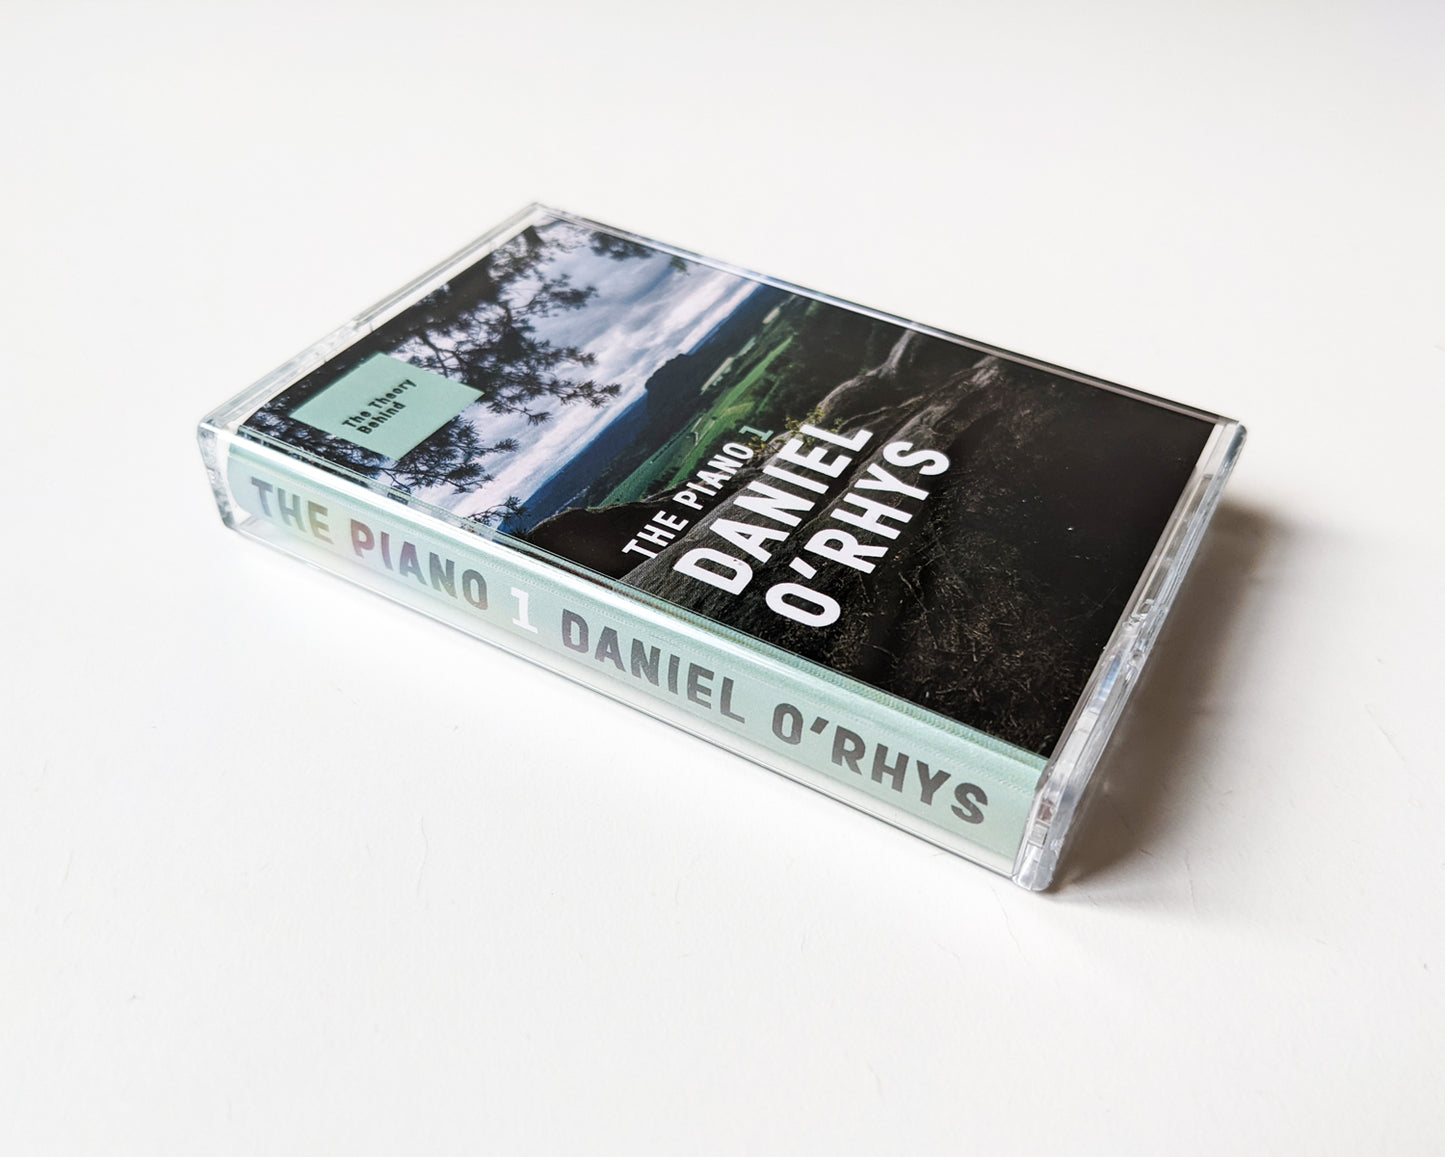 Daniel O'Rhys X The Theory Behind - The Piano 1 (Kassette)